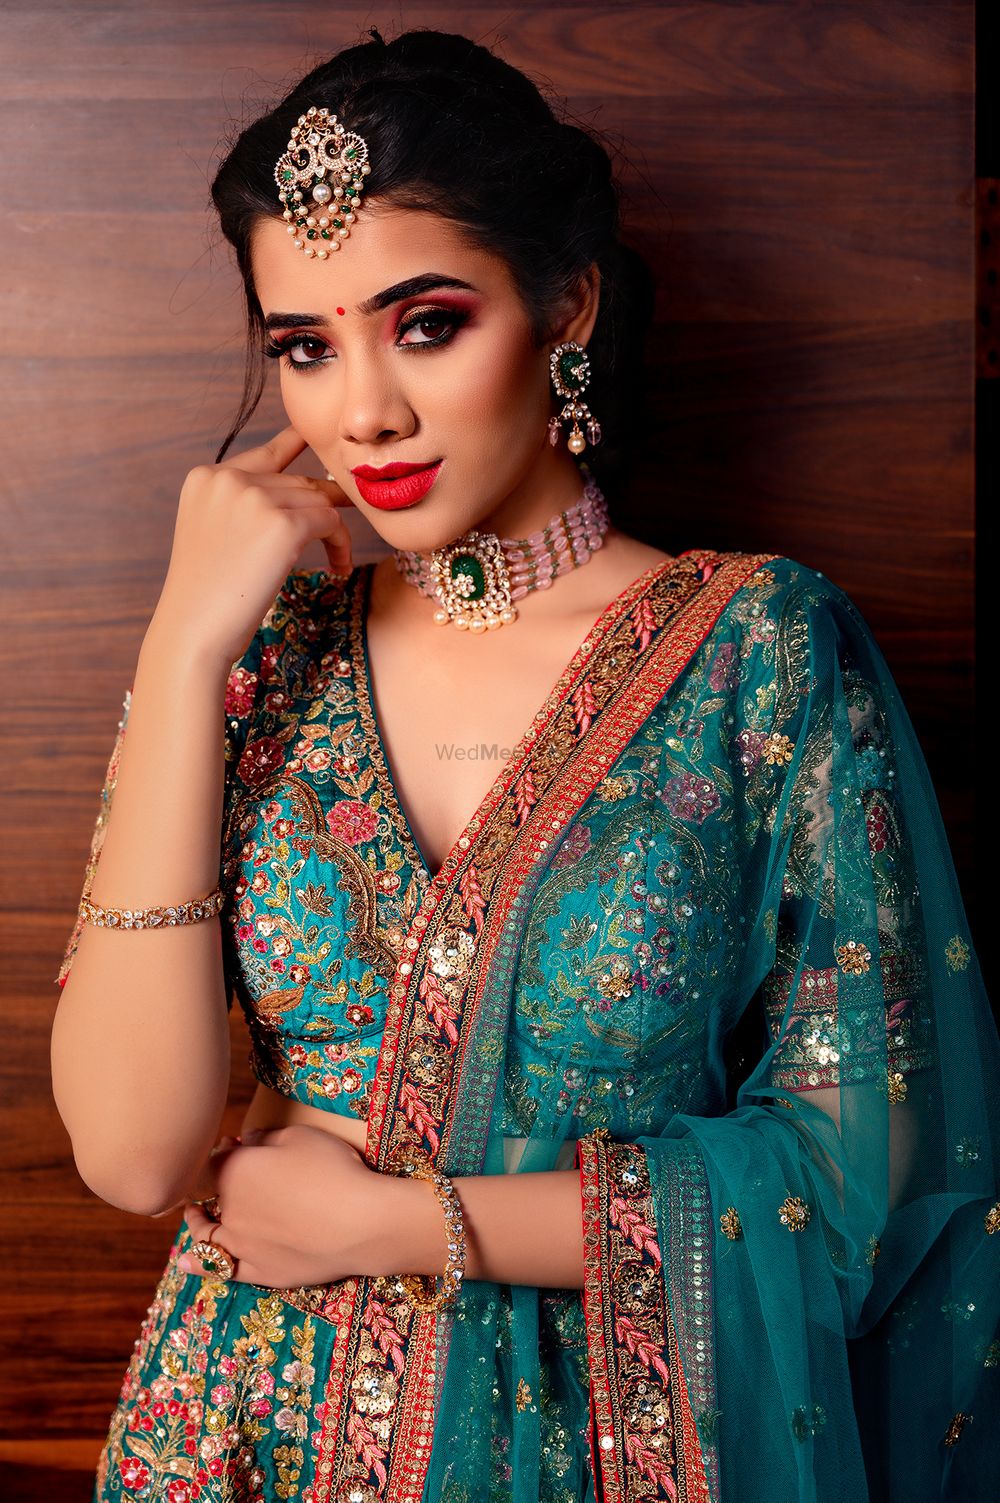 Photo of Bride in off-beat jewelry and blue embroidered lehenga.